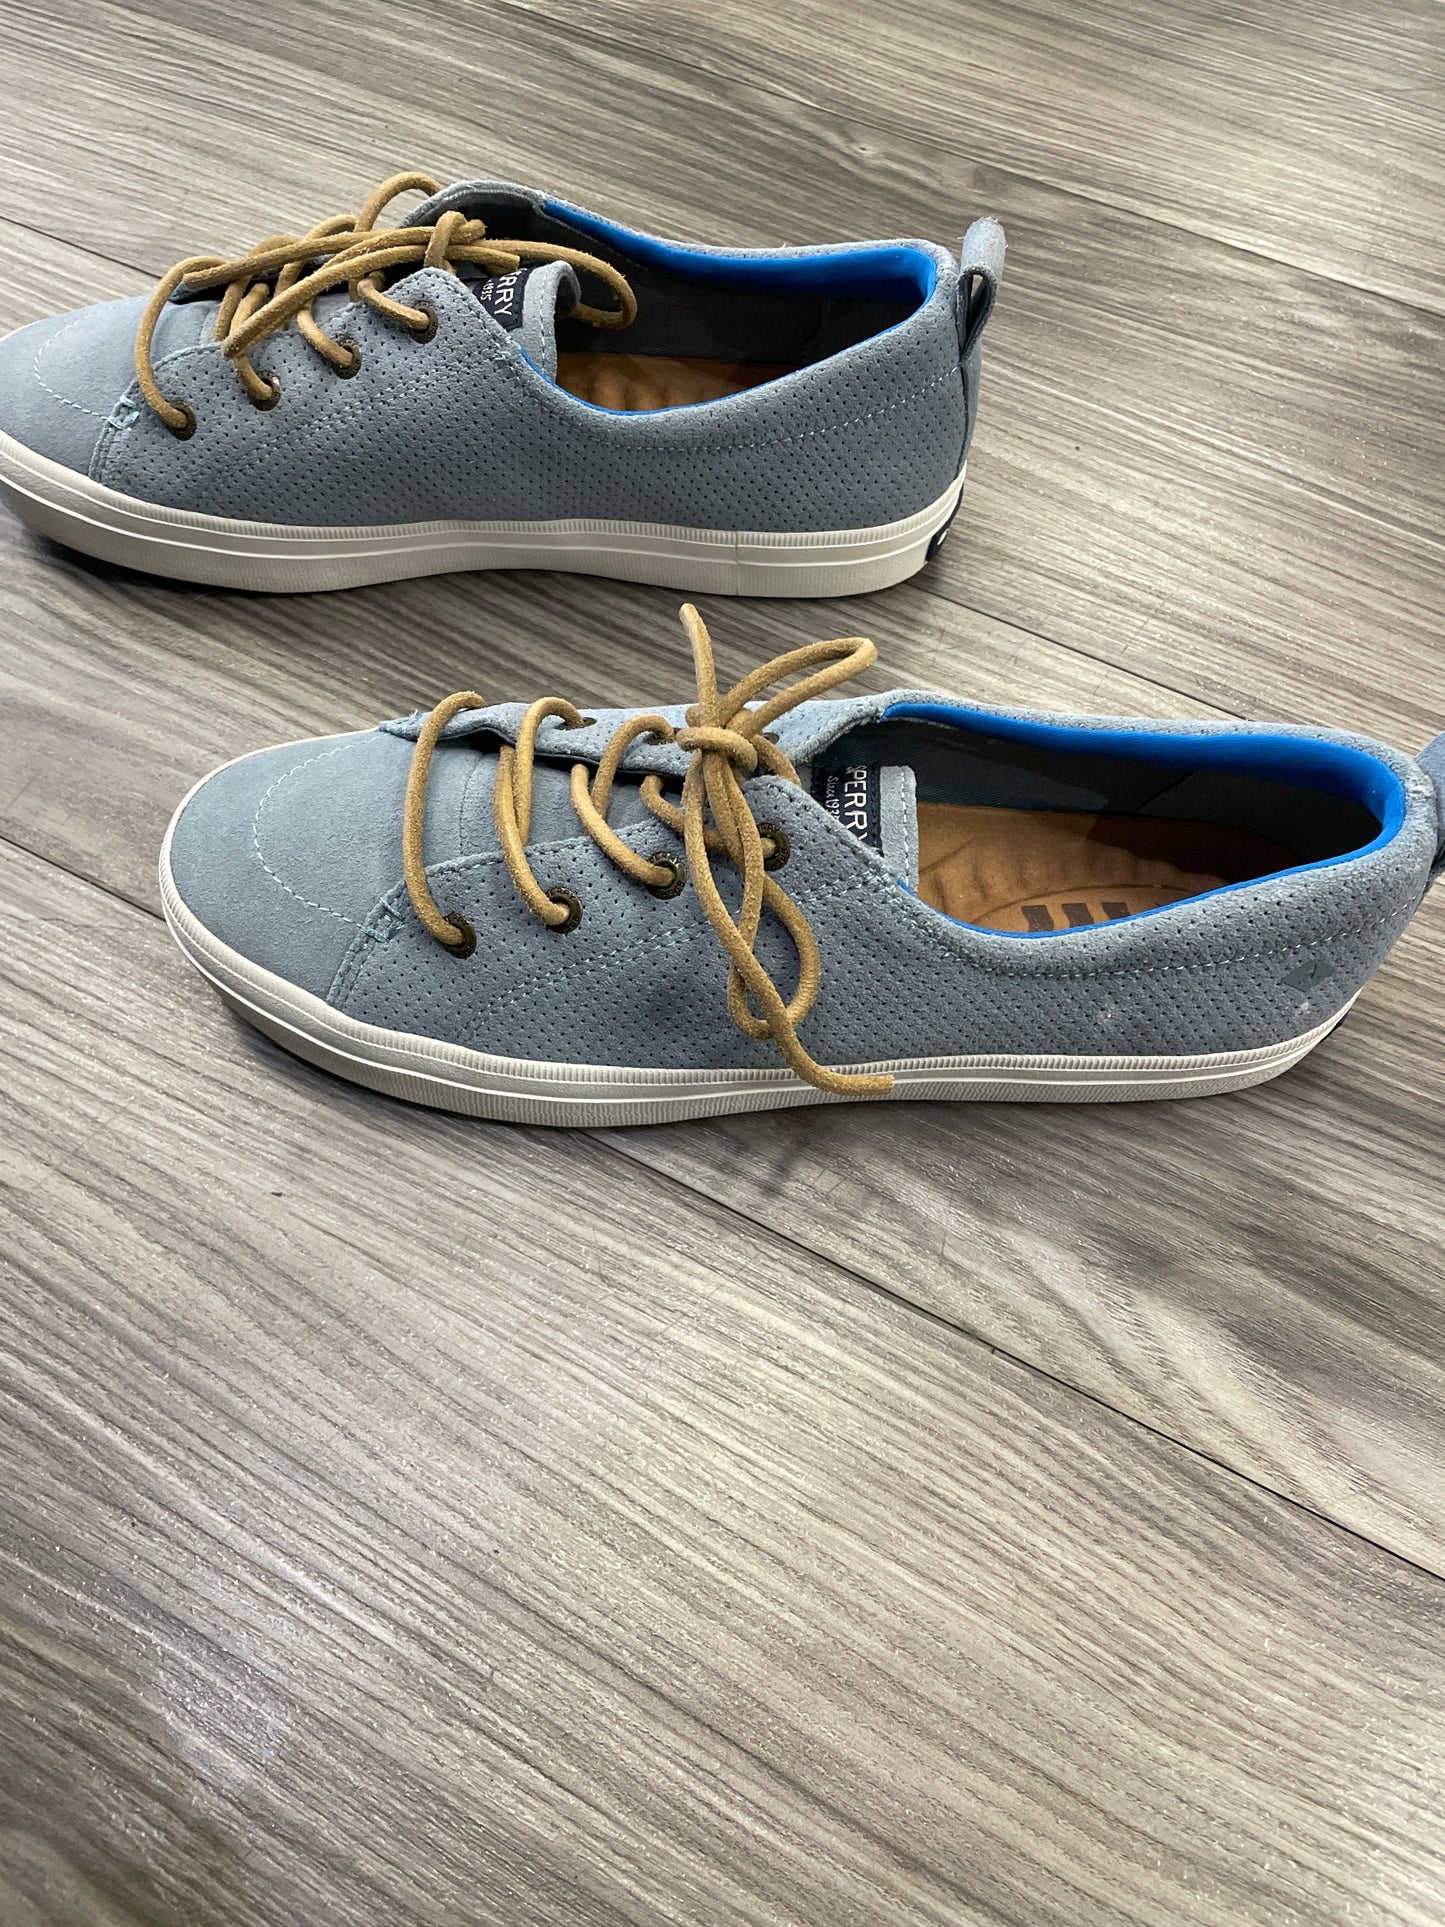 Blue Shoes Flats Sperry, Size 7.5